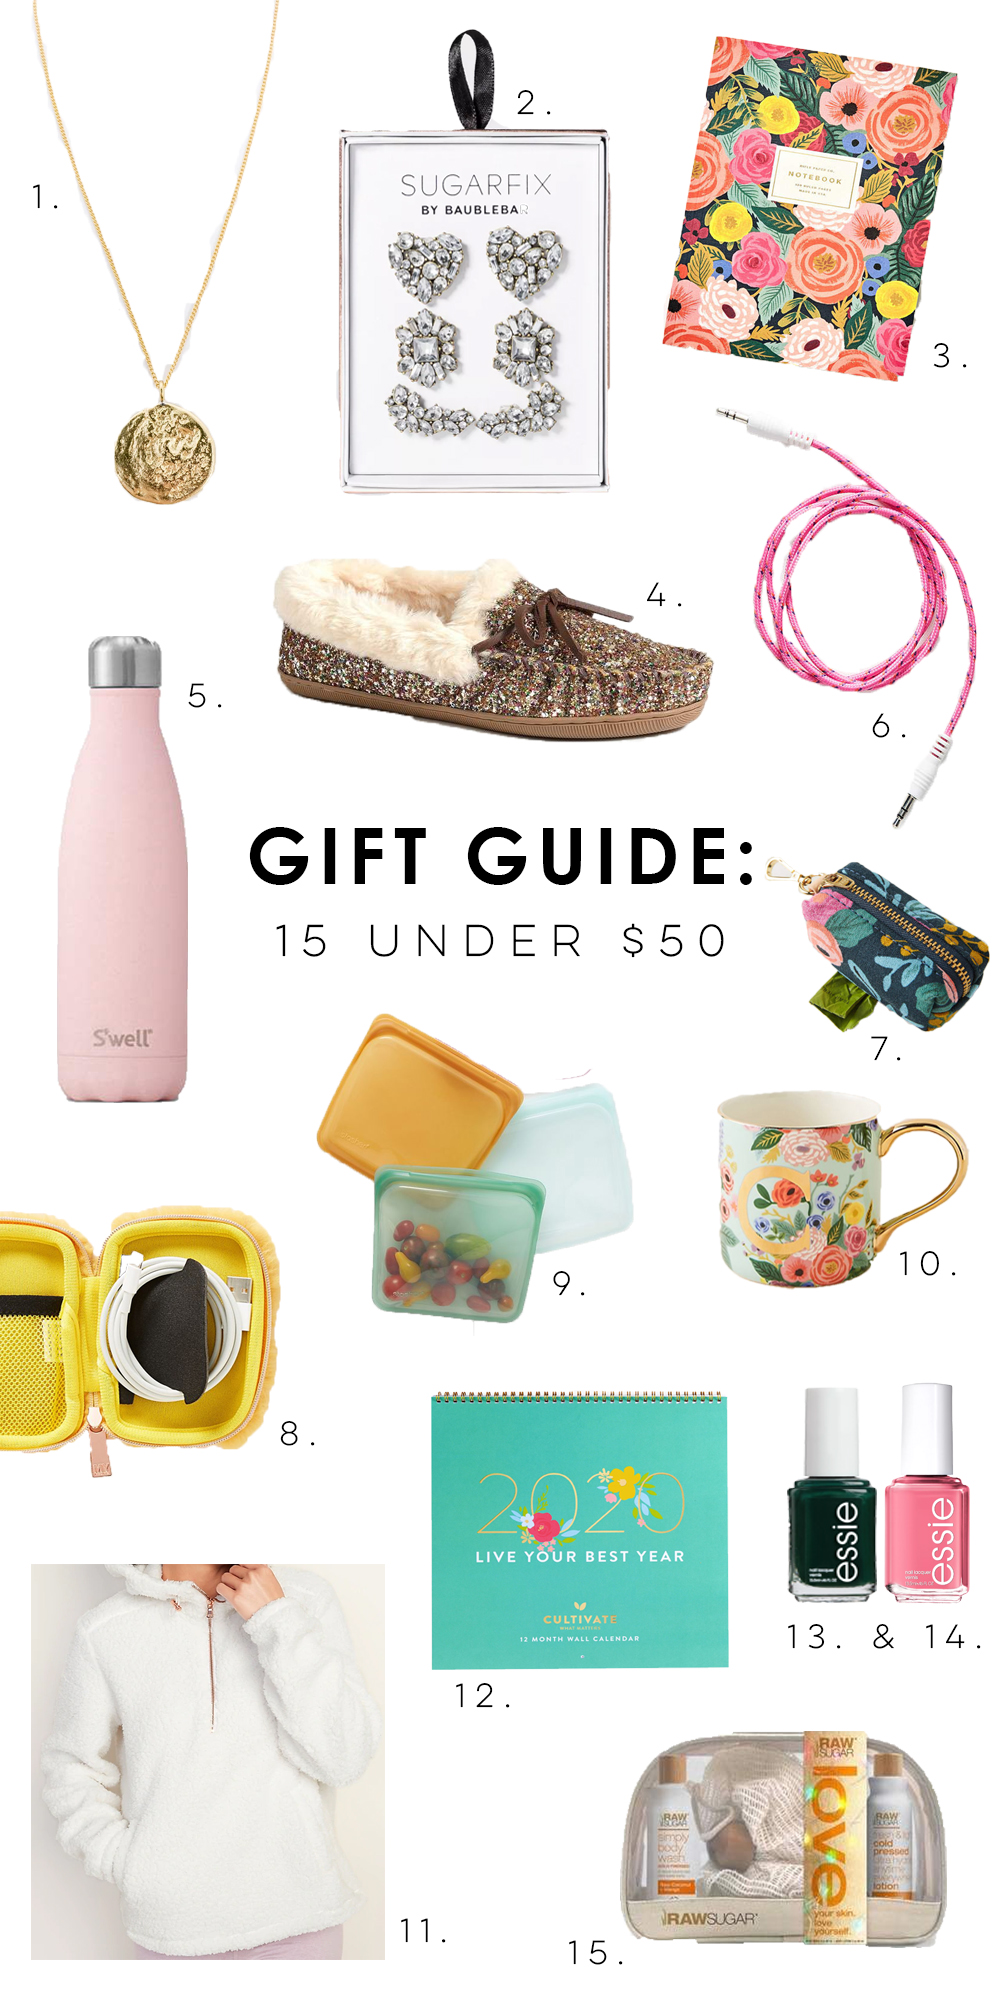 Girly Gift Guide for Her: 15 Under $50 / The Ultimate Gift Guide For Your BFF / Christmas Gift Ideas - Sunshine Style